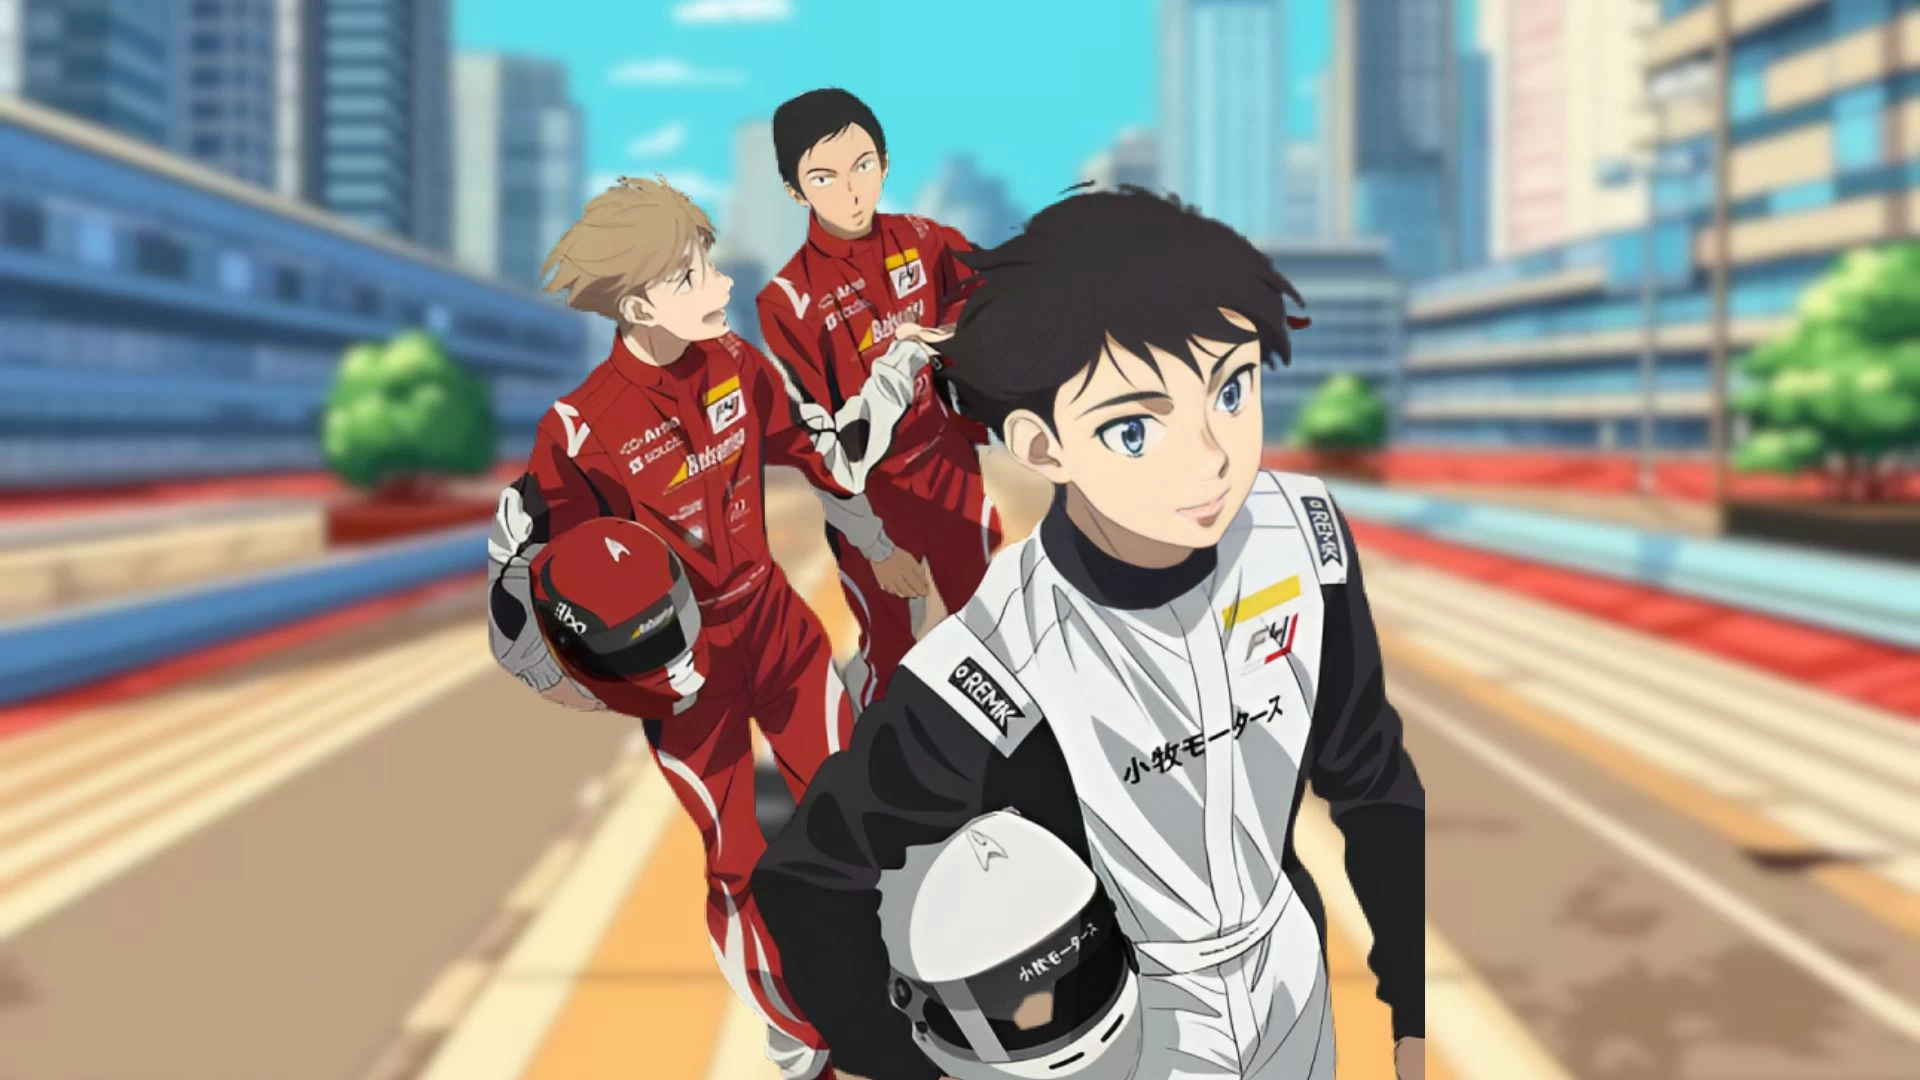 Overtake Season 1 Episode 3 Release Date and Time, Countdown, When is it Coming Out?